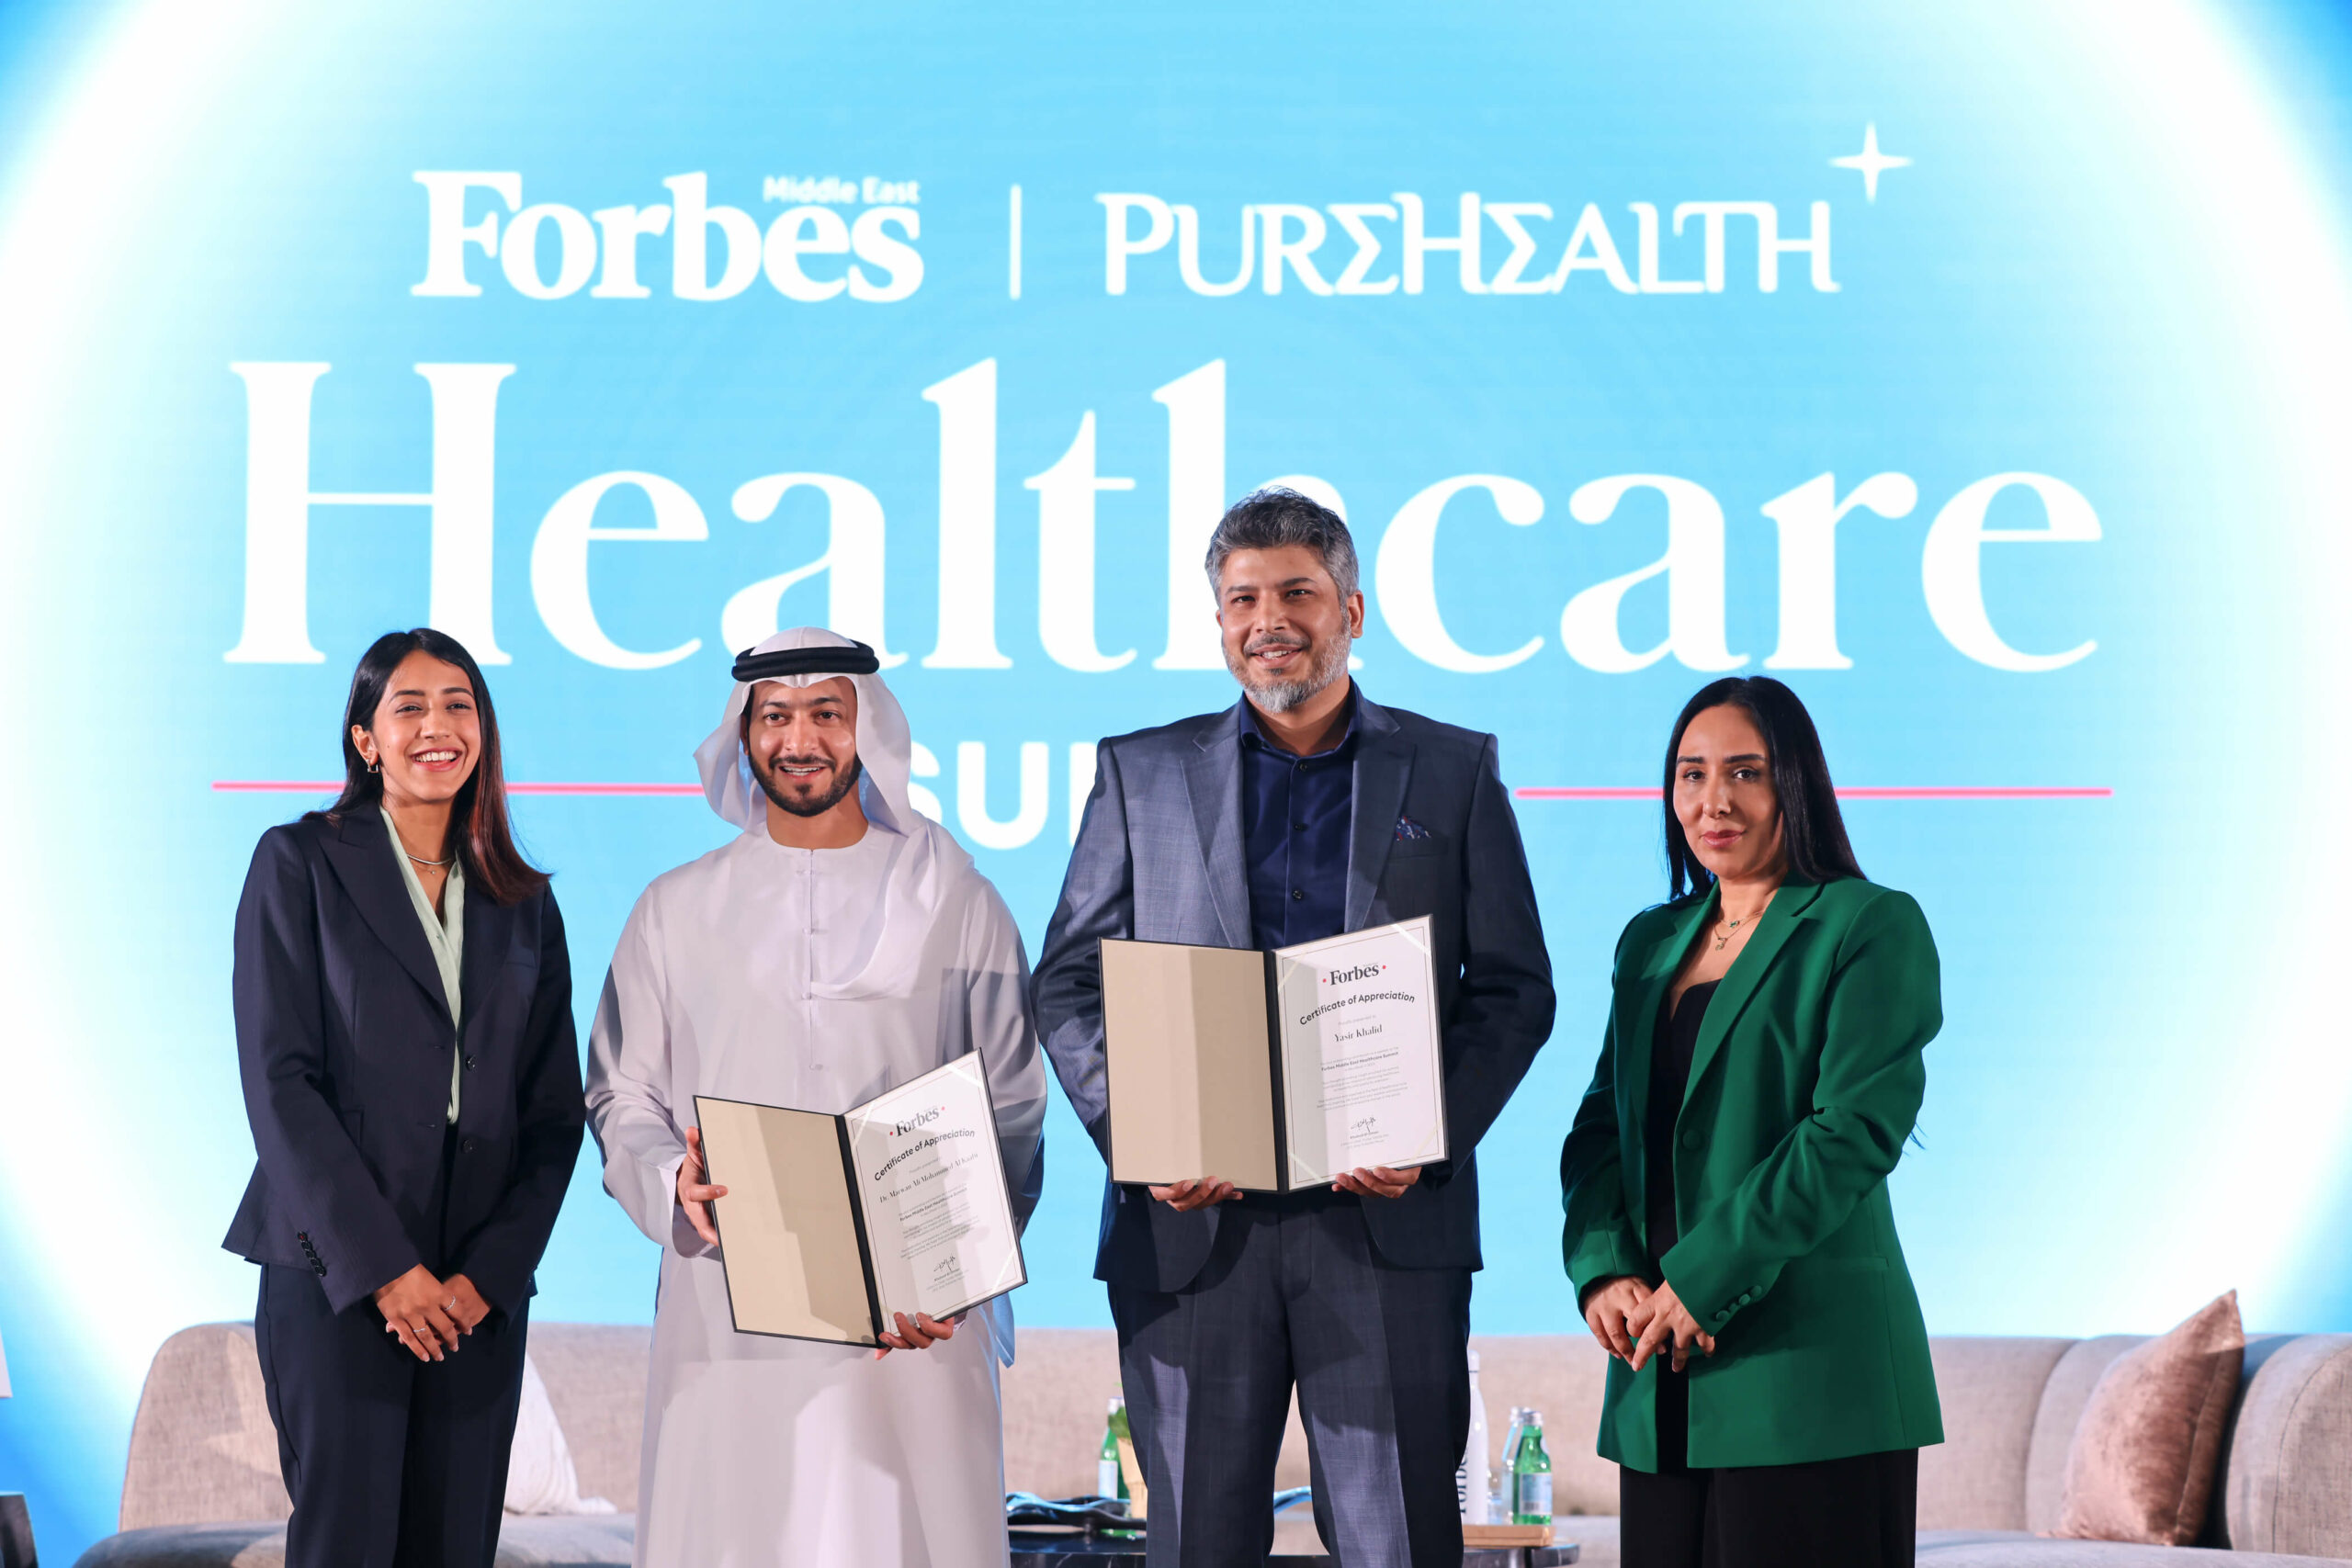 Forbes Healthcare Summit 2023